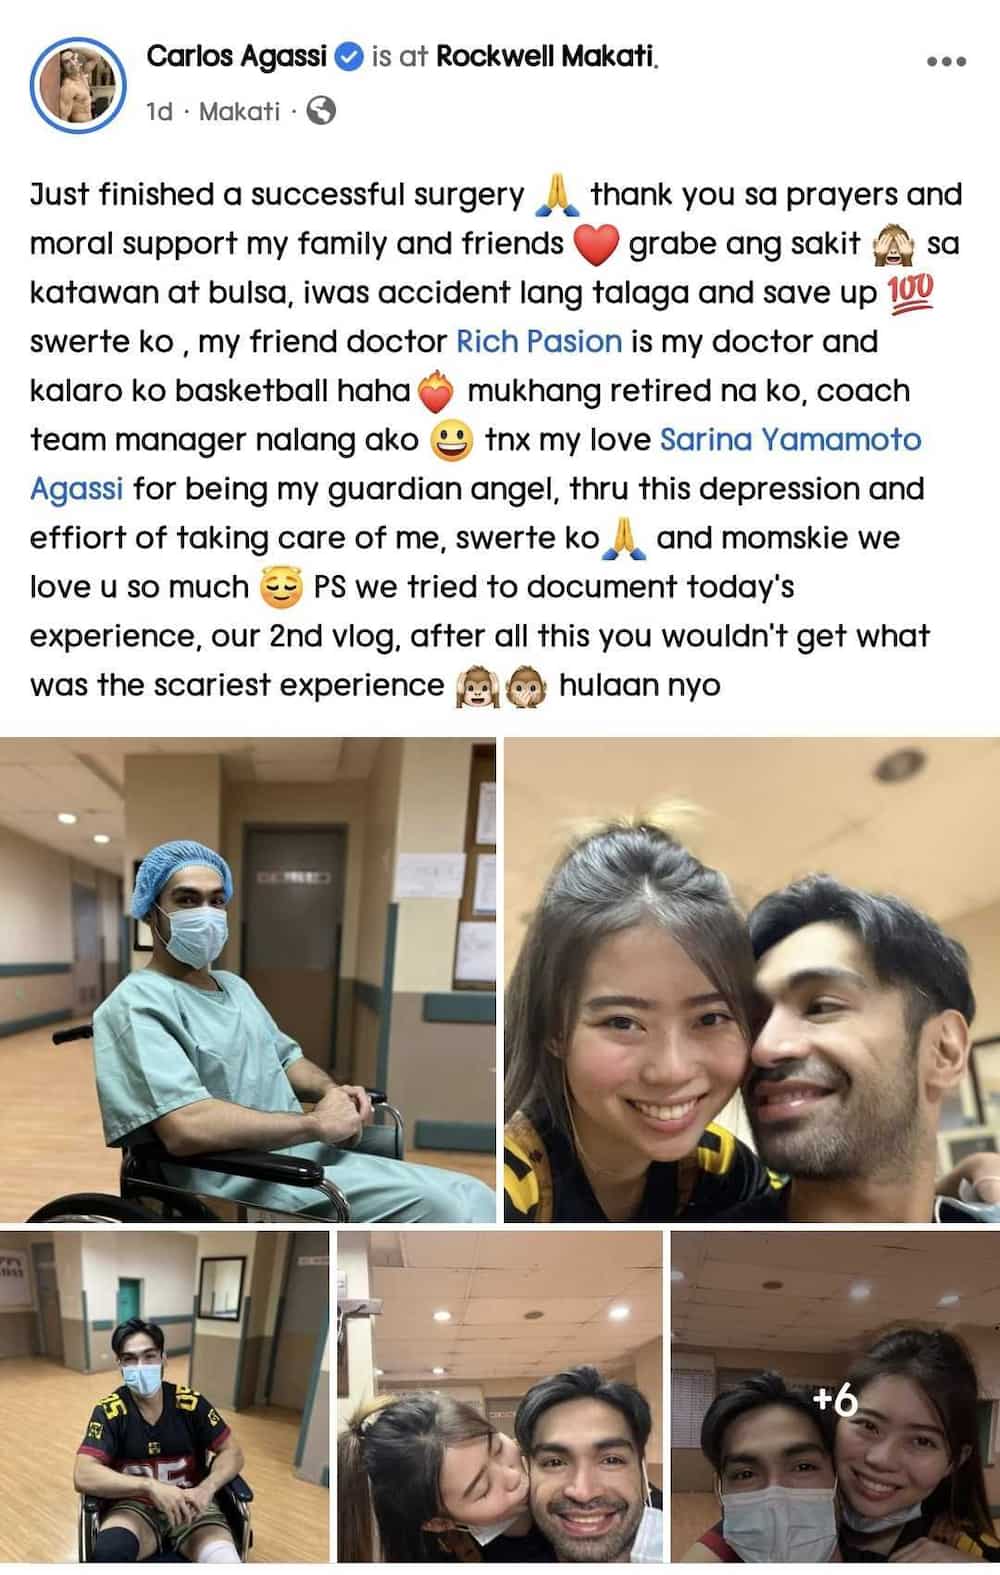 Carlos Agassi gives health update after knee surgery: "Mukhang retired na 'ko"